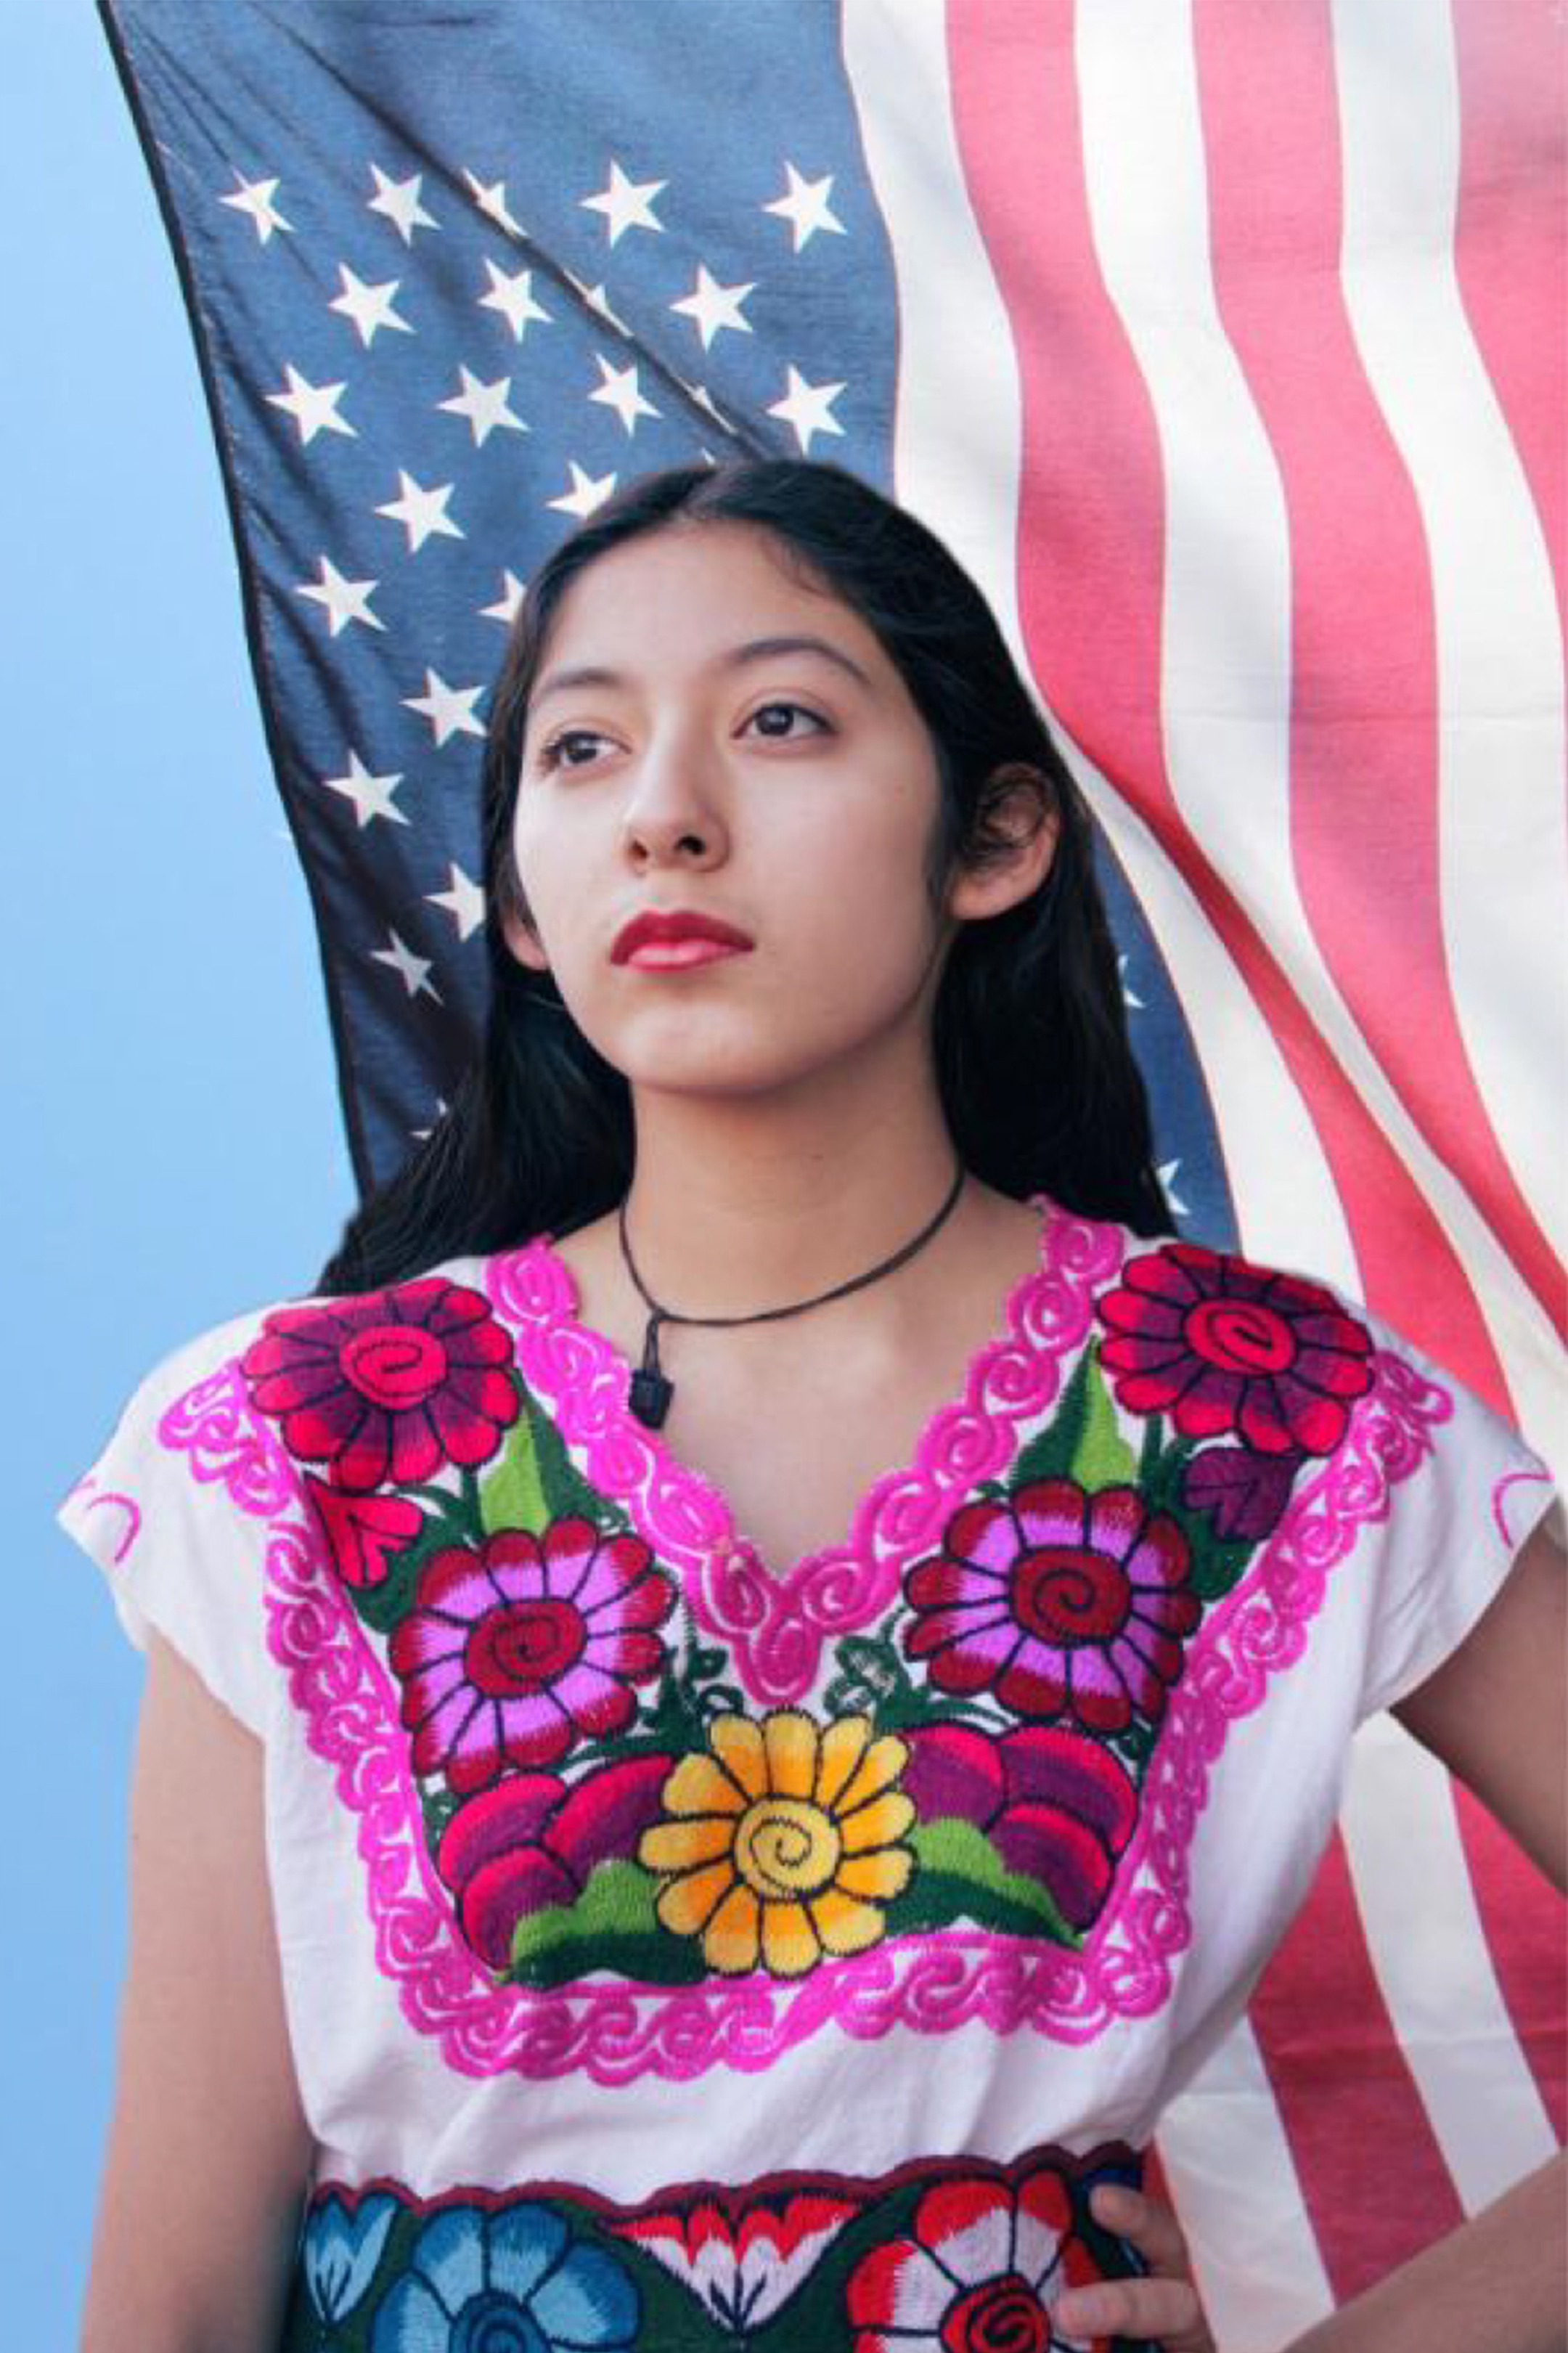 Young woman in traditional Mexican clothing standing in front of a flowing American flag